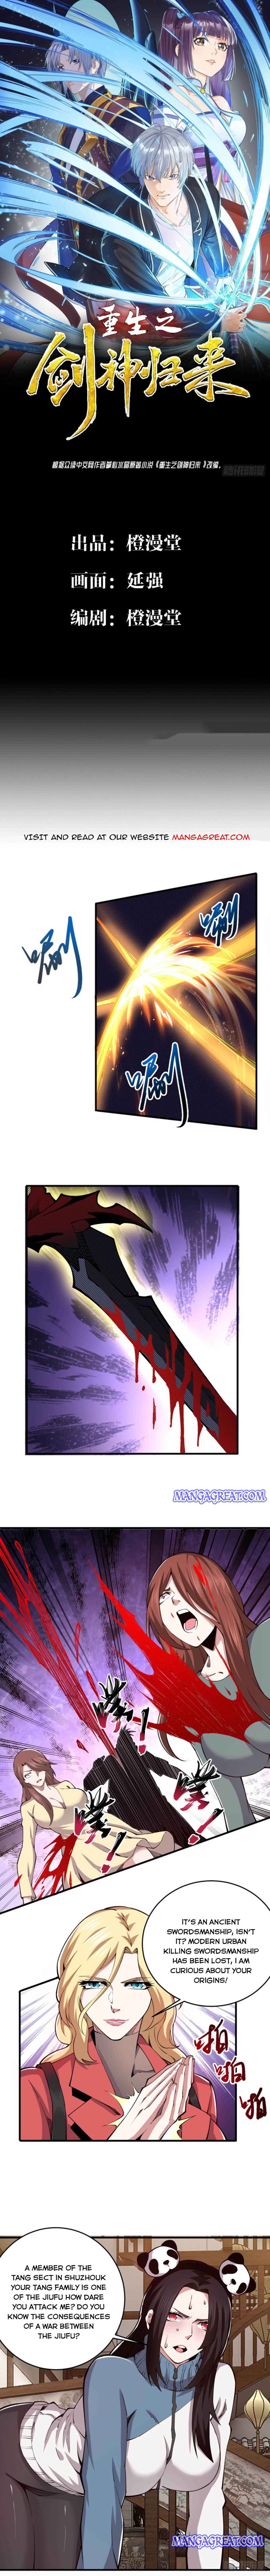 Vengeance Of The Reawakened Sword God Chapter 52 page 1